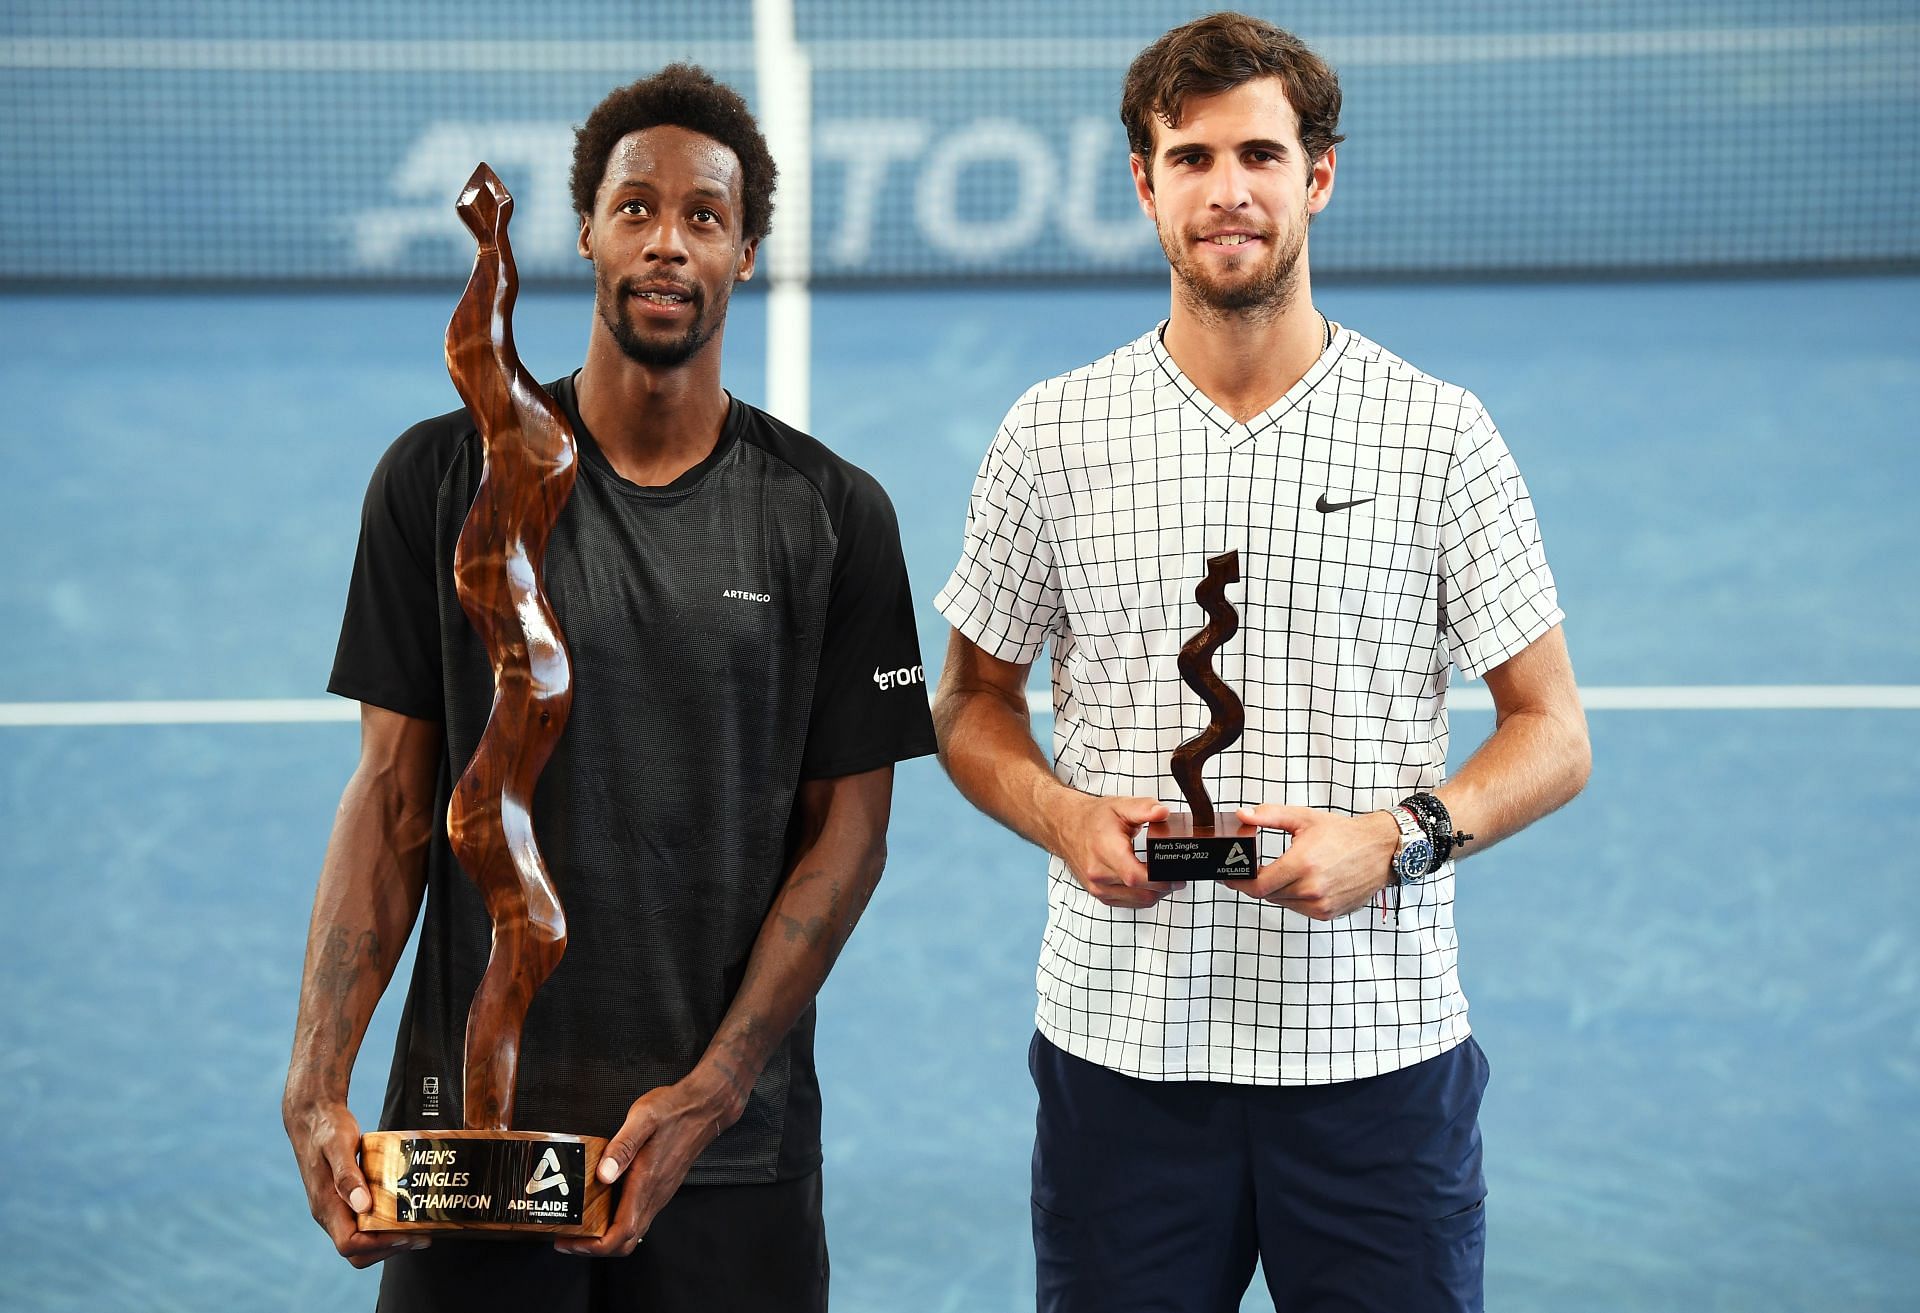 Gael Monfils won the 11th ATP title of his career by defeating Karen Khachanov